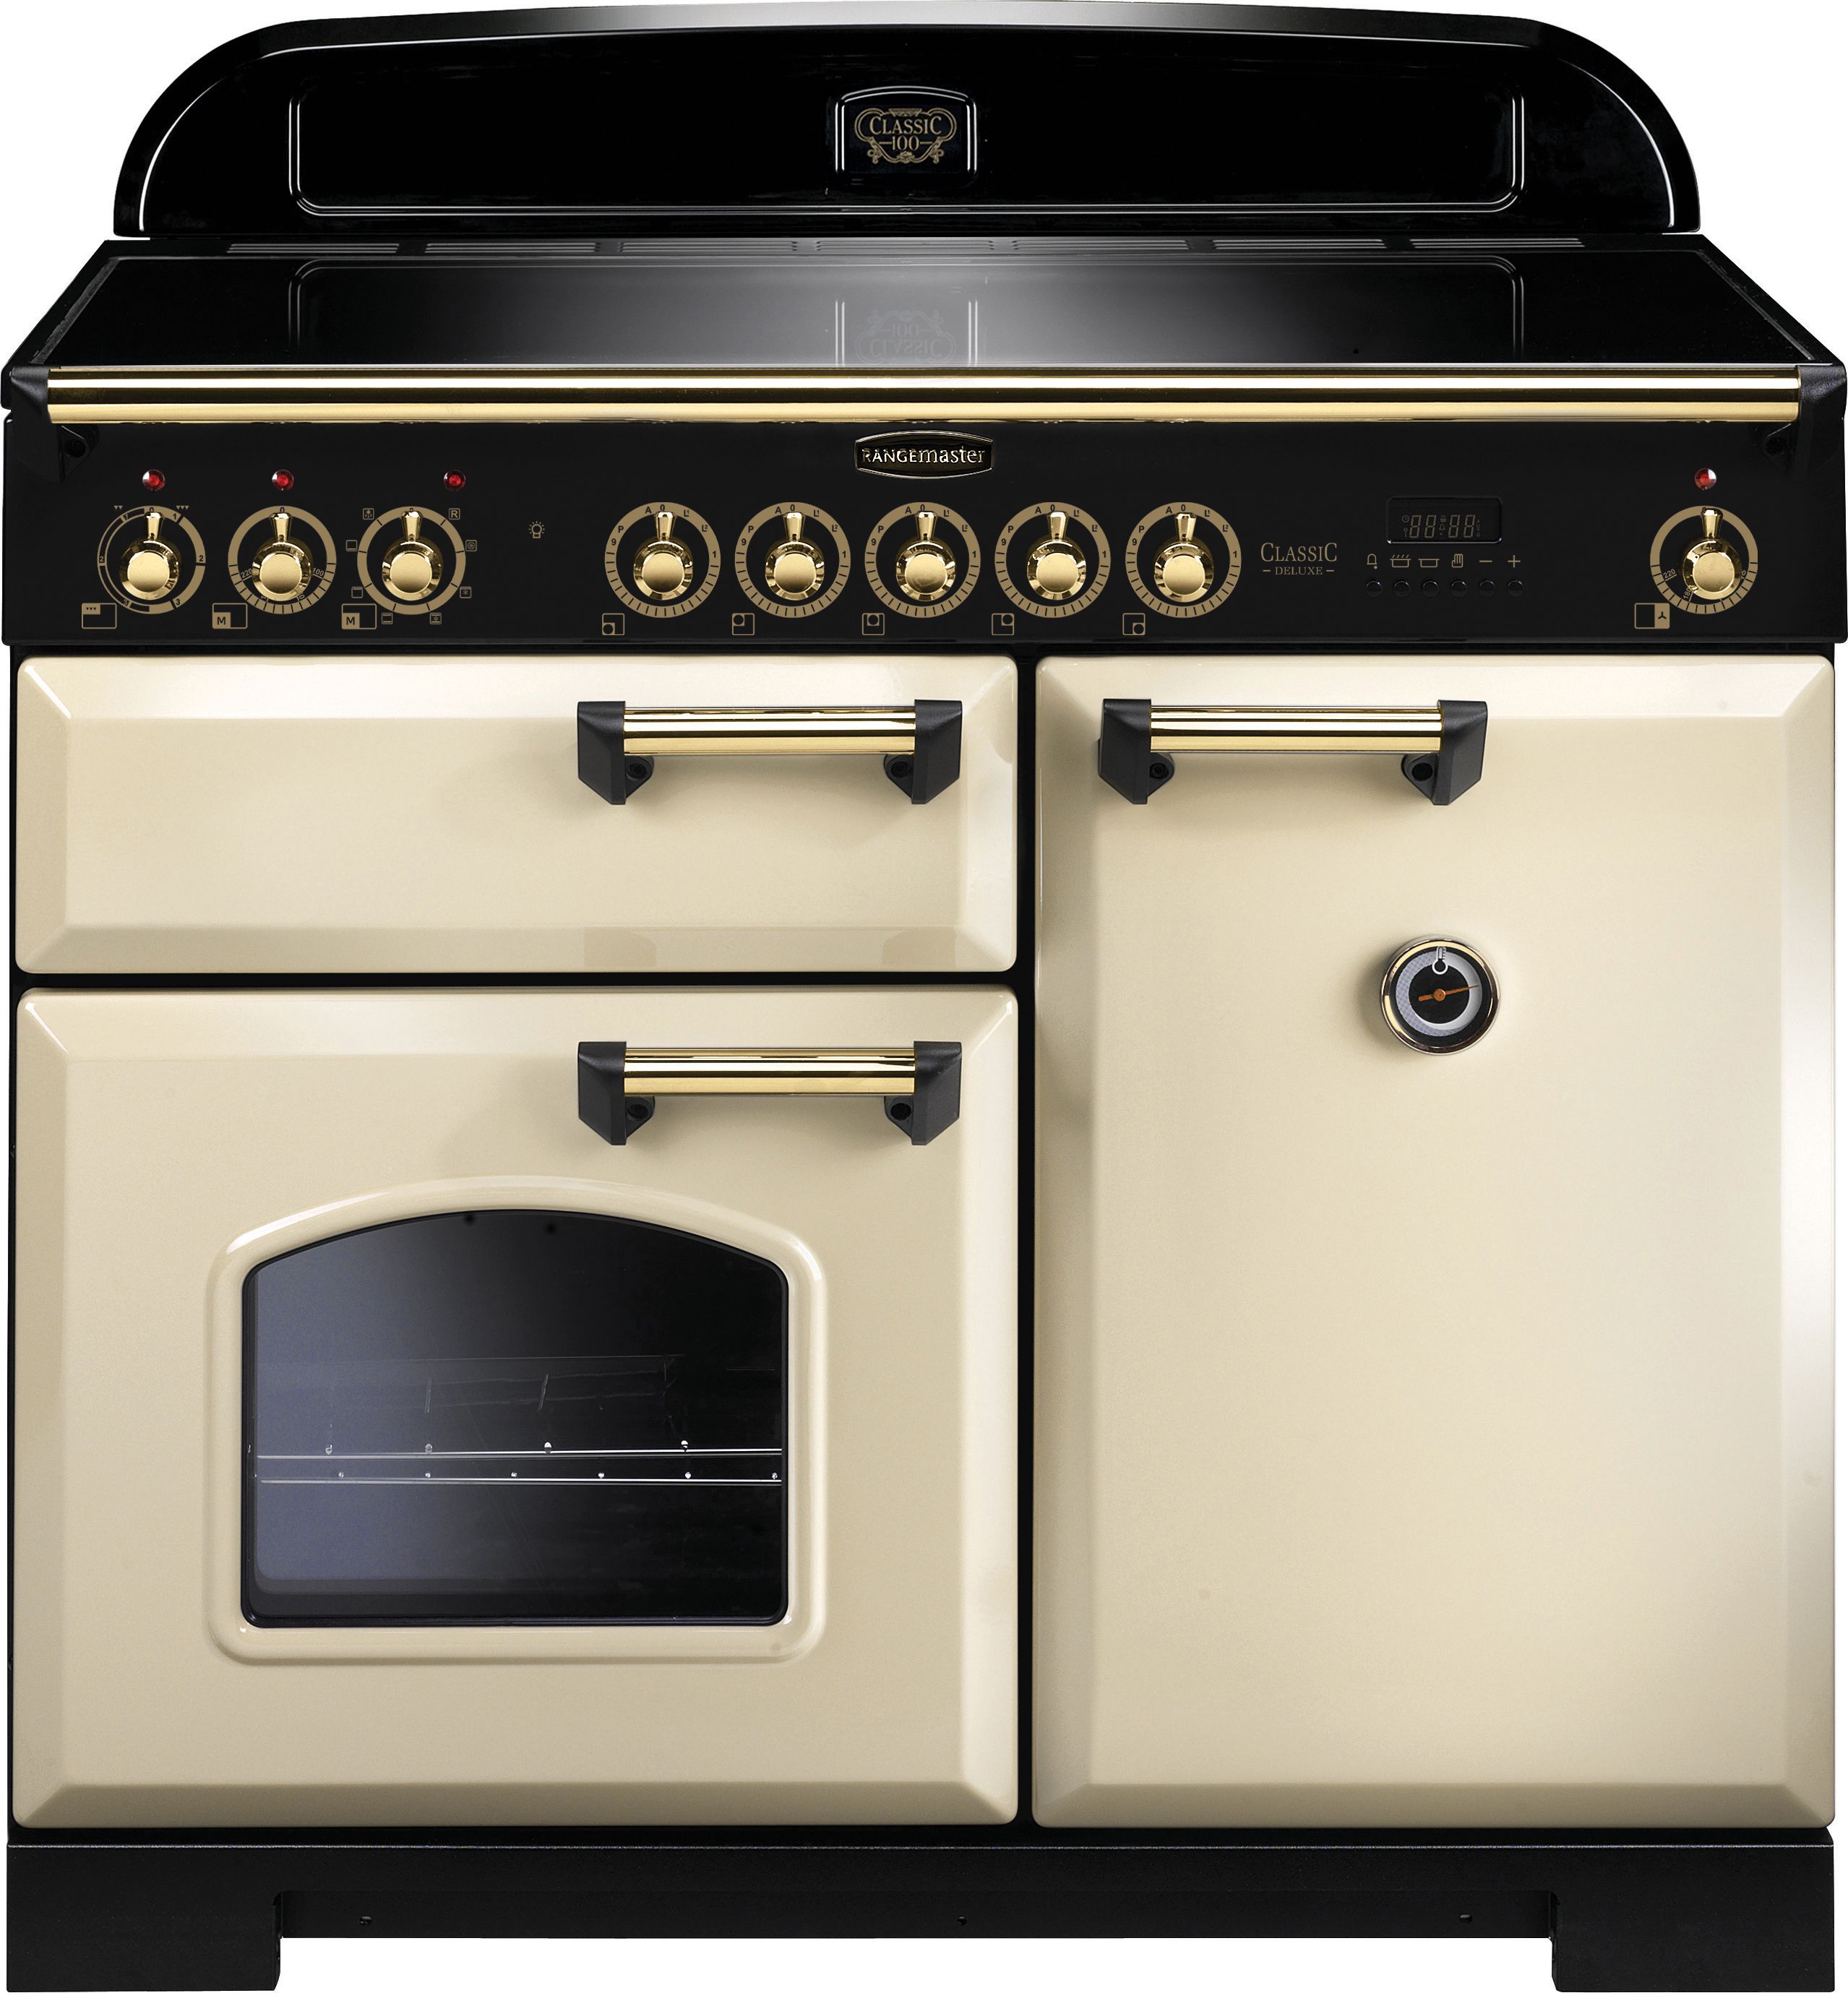 Rangemaster Classic Deluxe CDL100EICR/B 100cm Electric Range Cooker with Induction Hob - Cream / Brass - A/A Rated, Cream